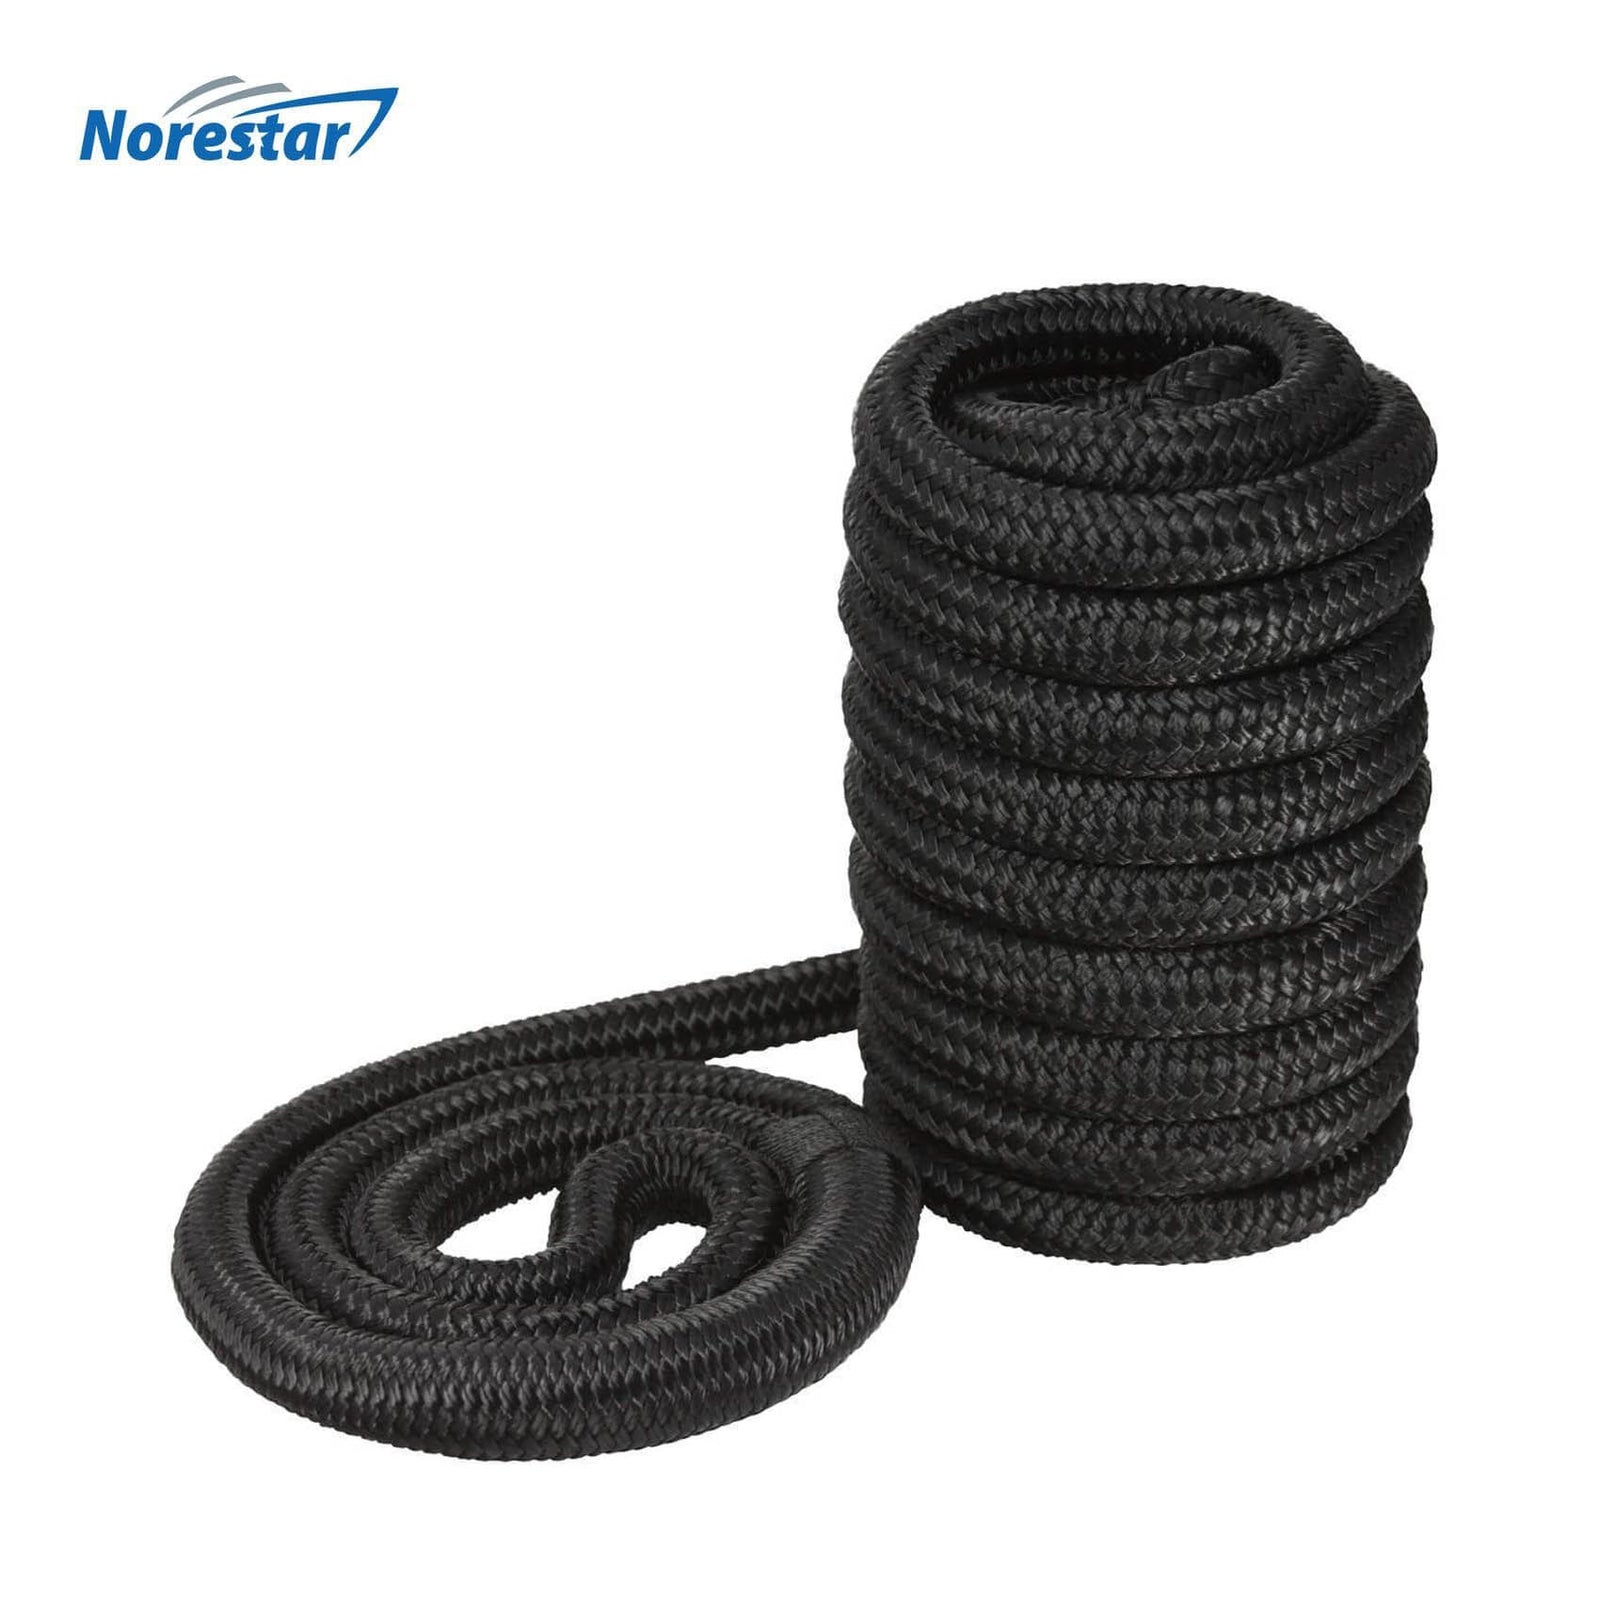 https://www.anchoring.com/cdn/shop/products/norestar-dl25-34bk-black-braided-nylon-dock-line-rolled-loop-left-front-angle-with-logo_02_1600x.jpg?v=1614722479